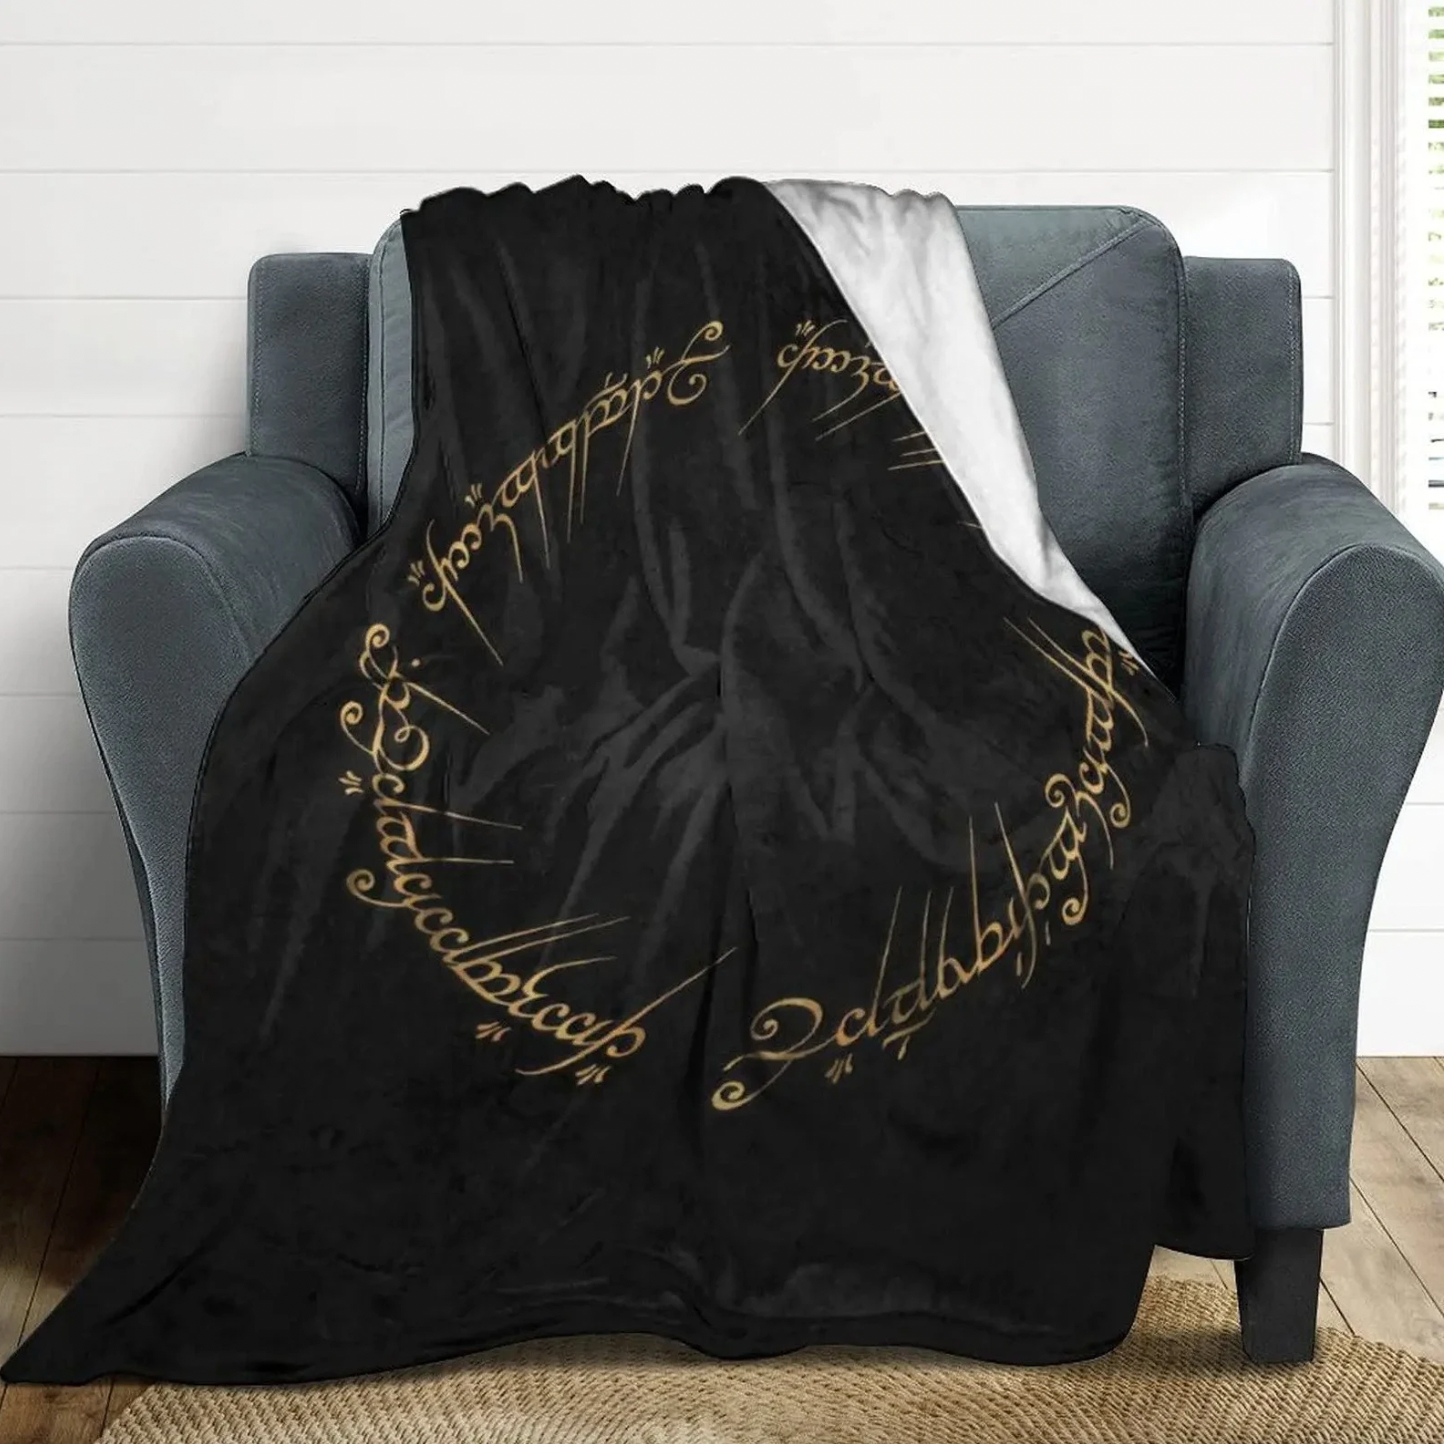 Lord of the Rings One Ring Micro Raschel Throw Blanket